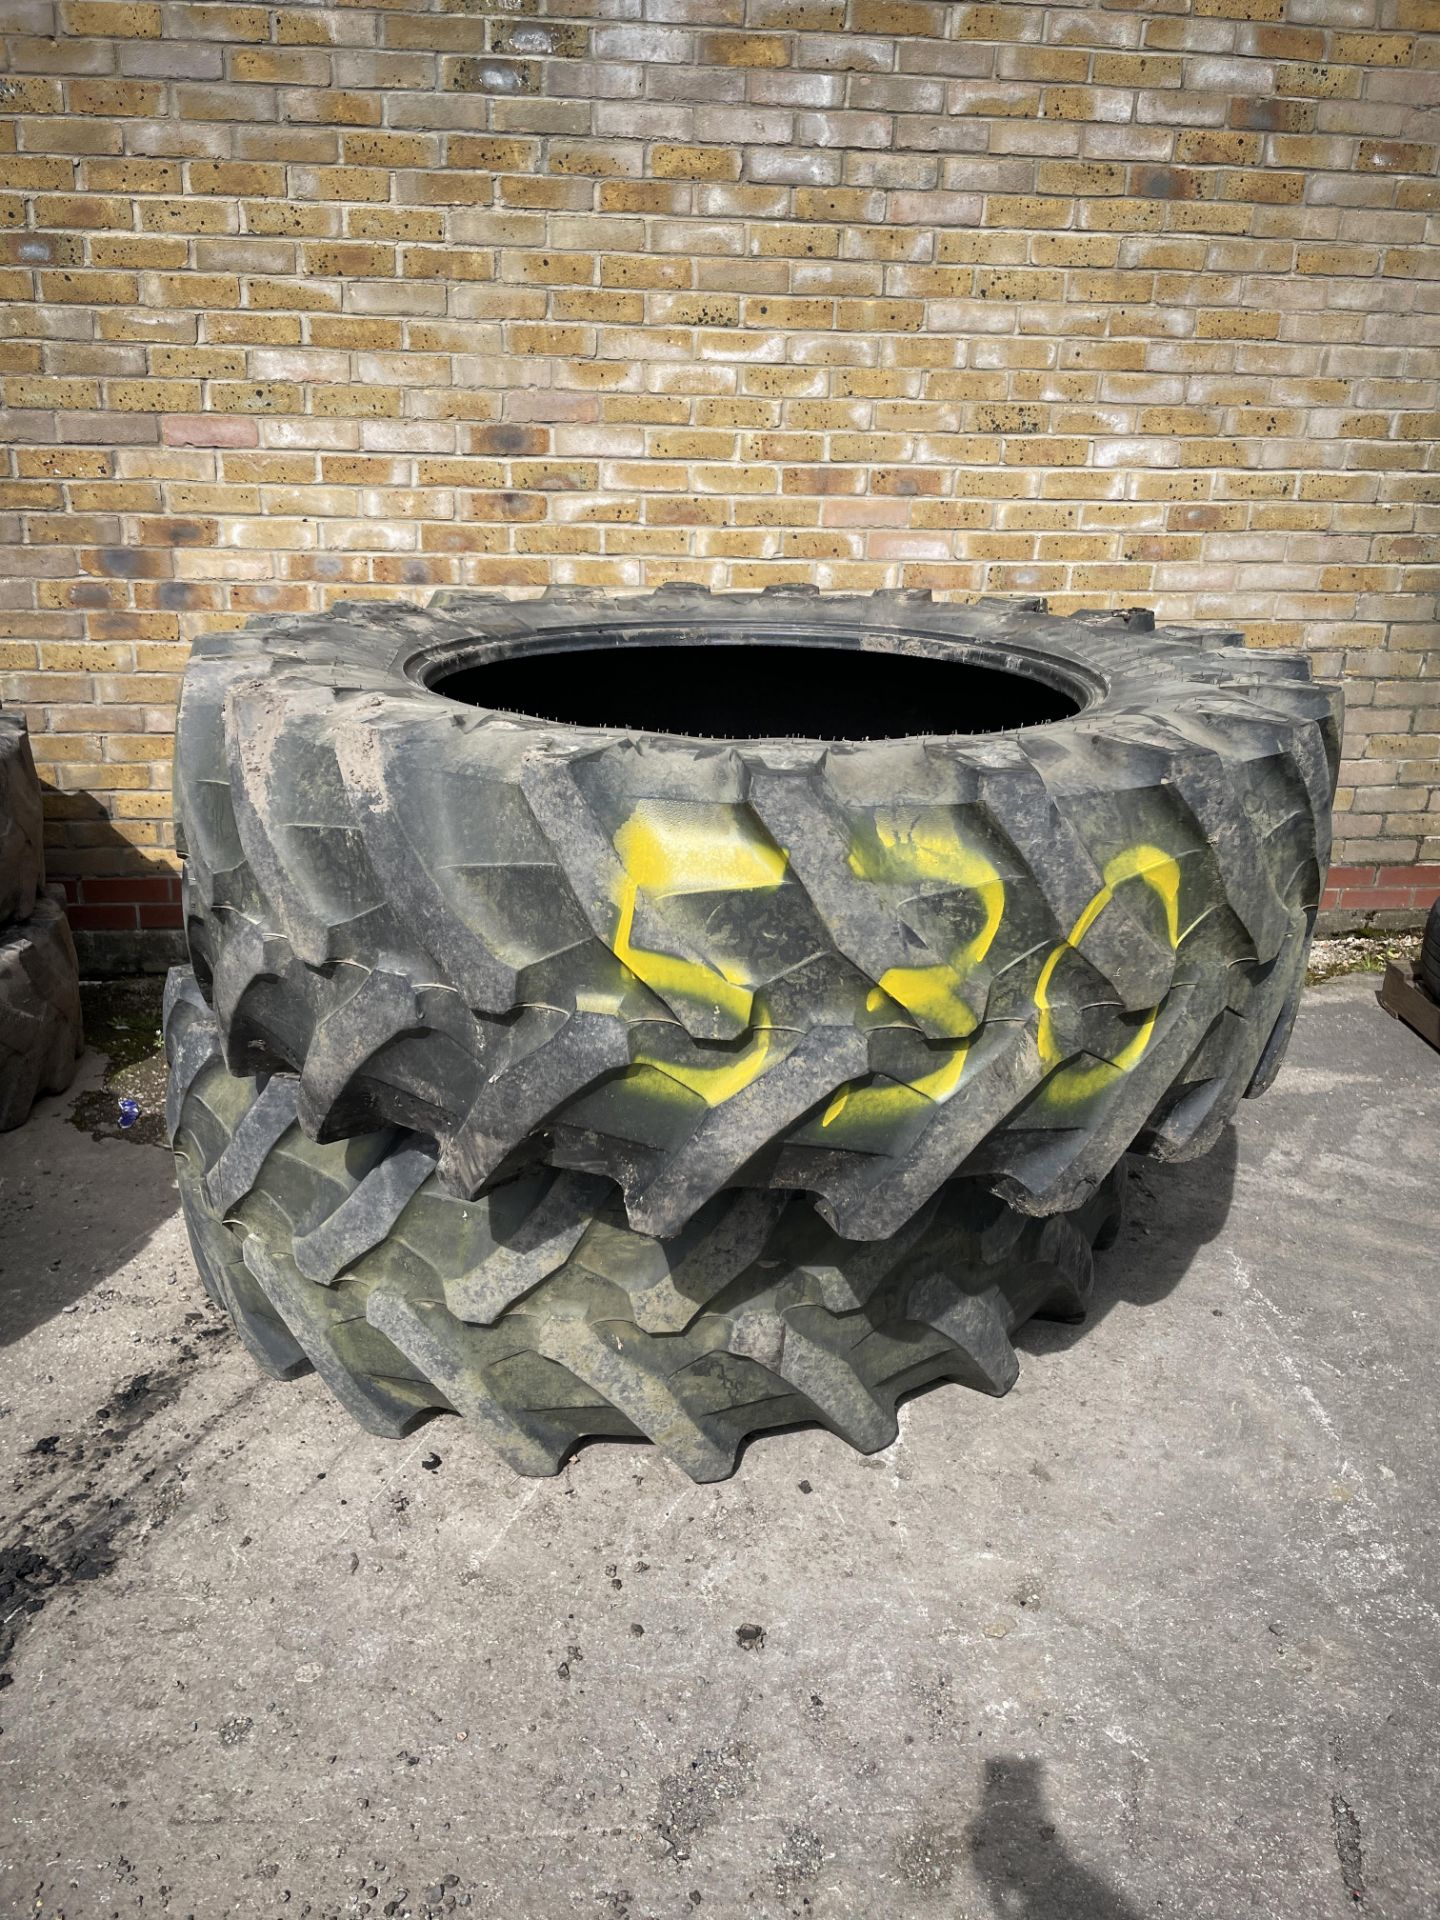 2: Used Trelleborg TM700 Tyres, 580 / 70 R42 As Lotted